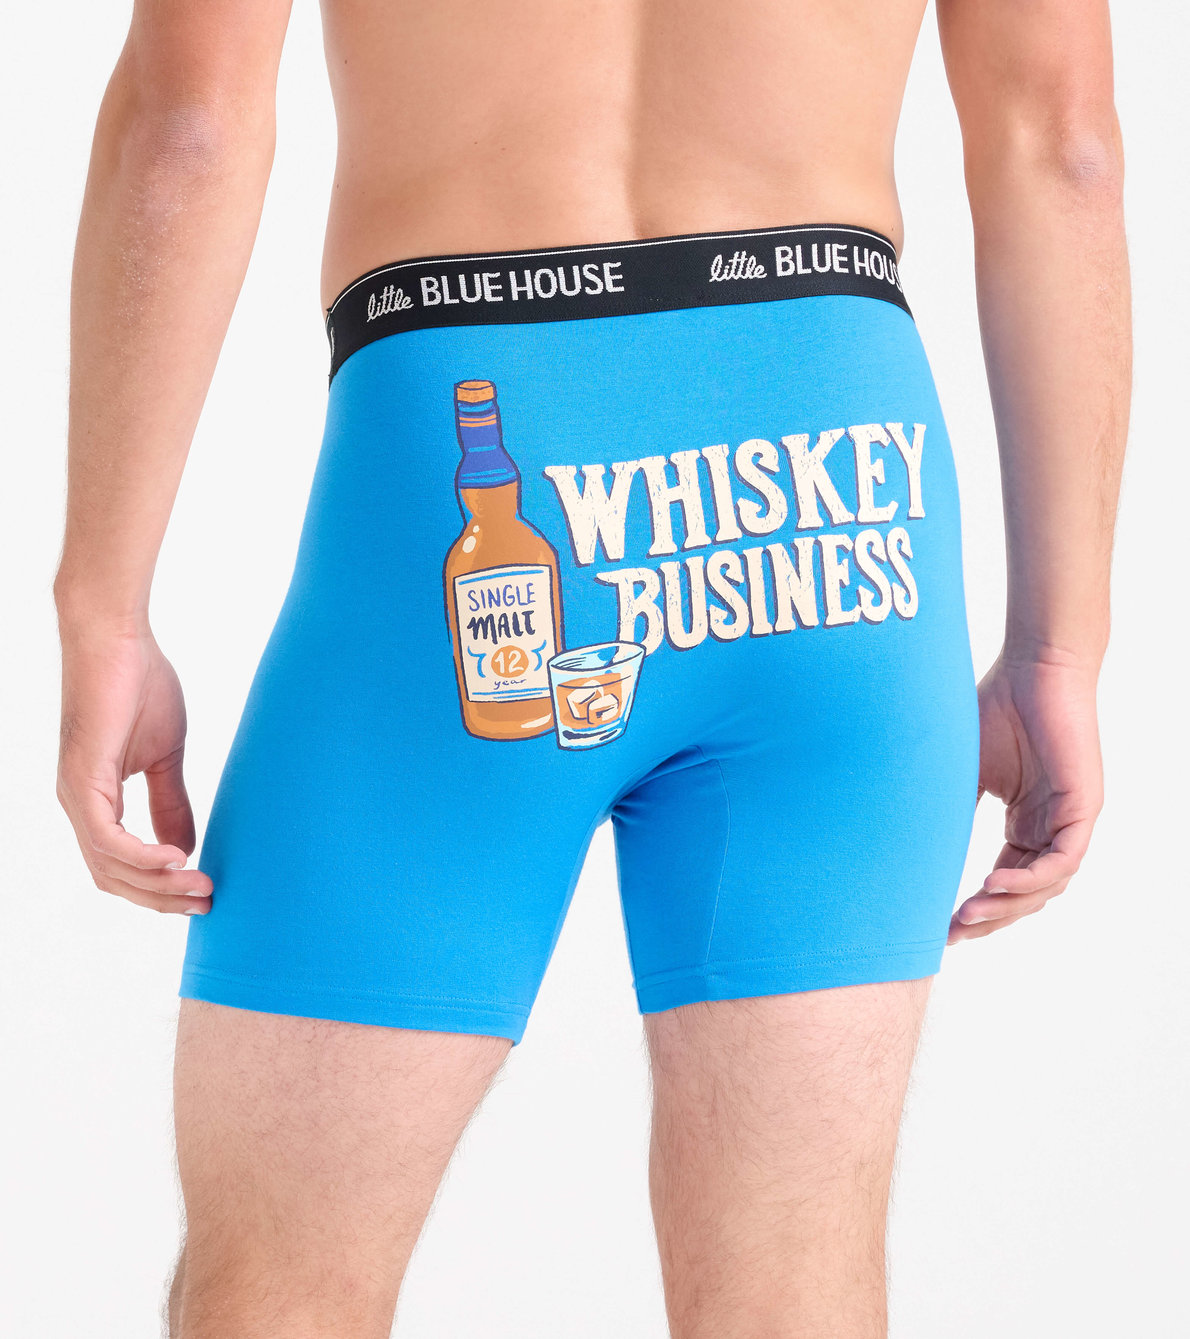 View larger image of Whiskey Business Men's Boxer Briefs